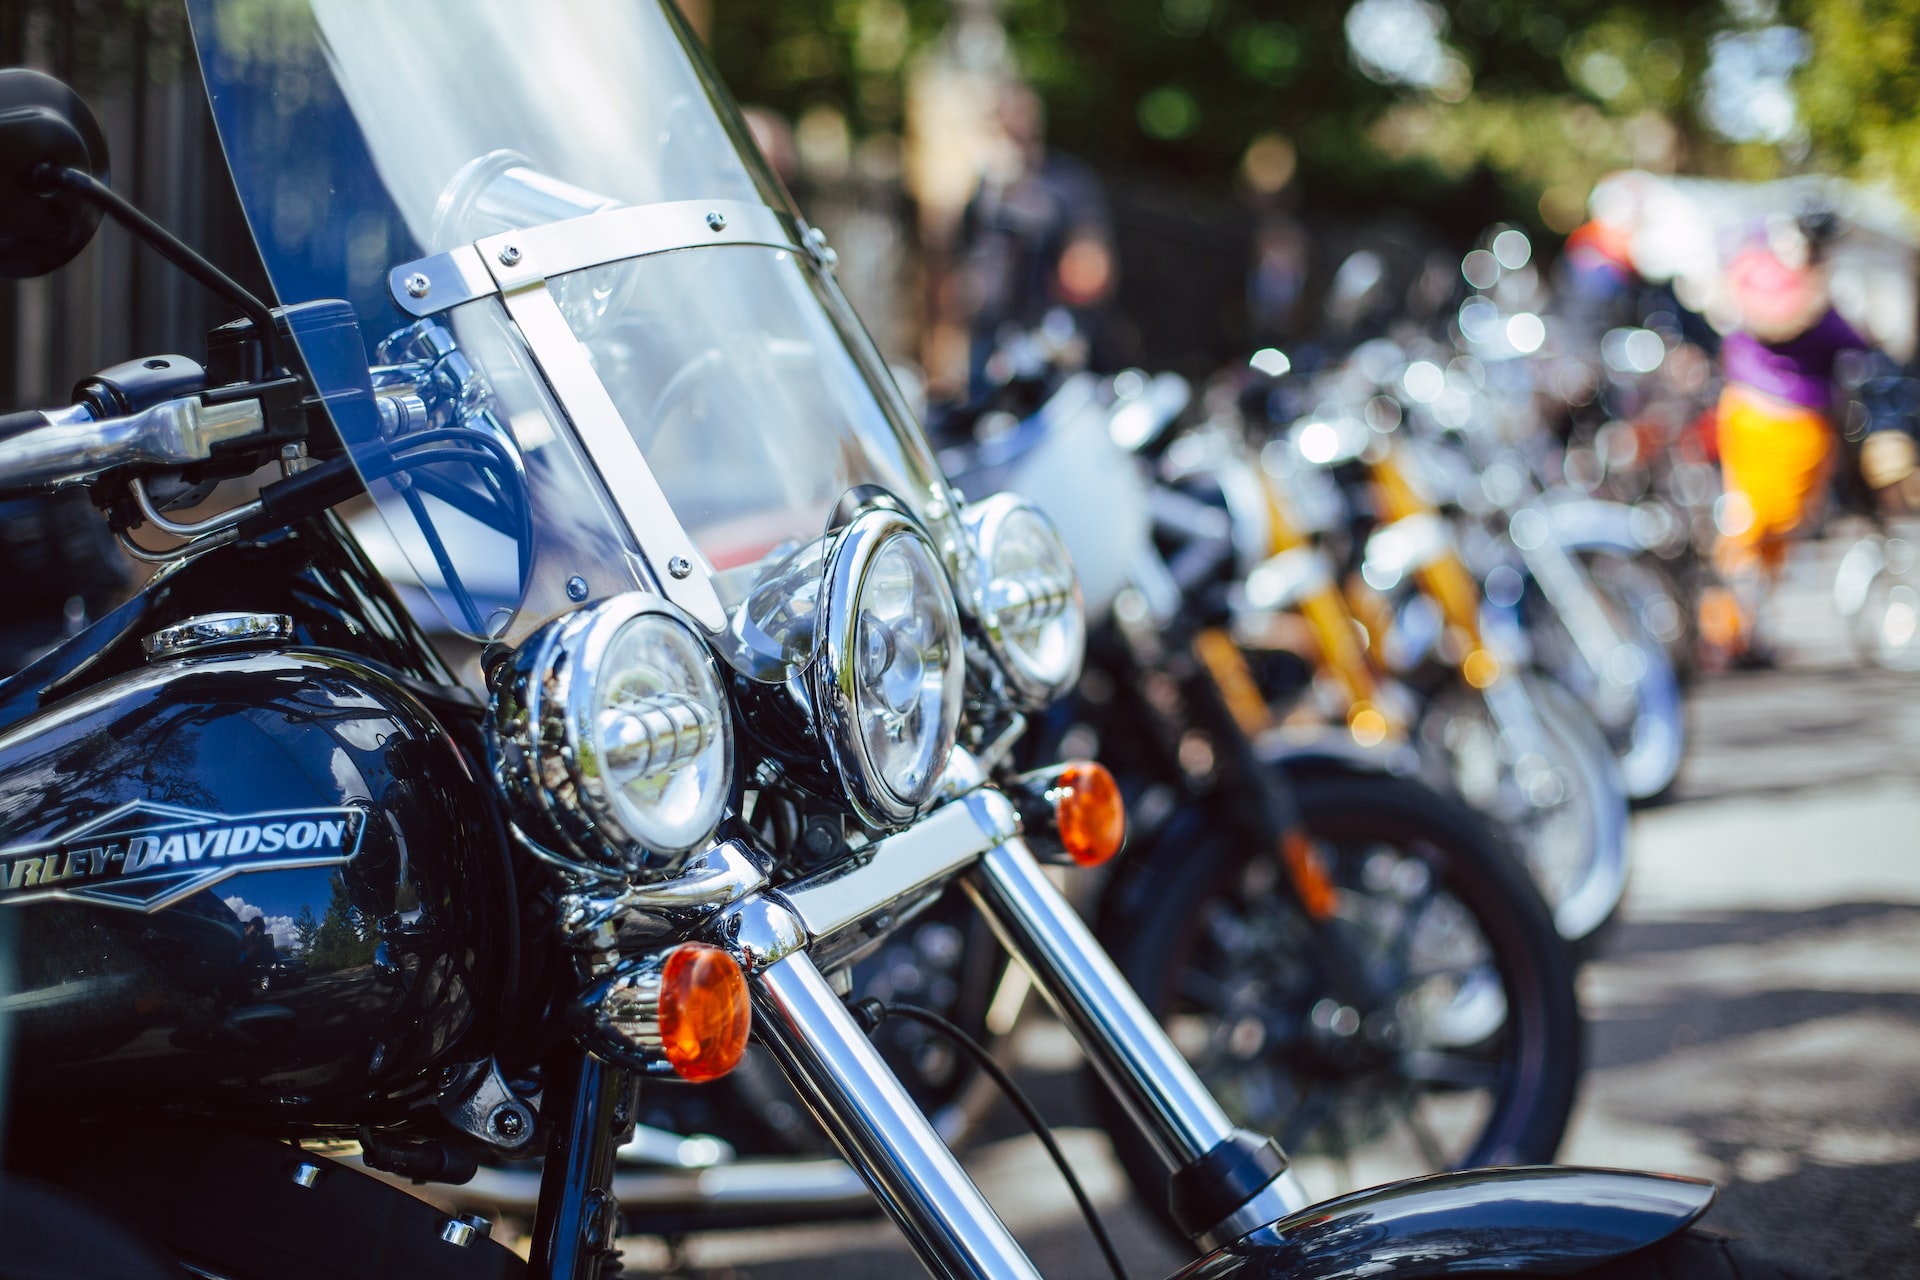 Harley Davidson motorcycle with other motor | Veteran Car Donations